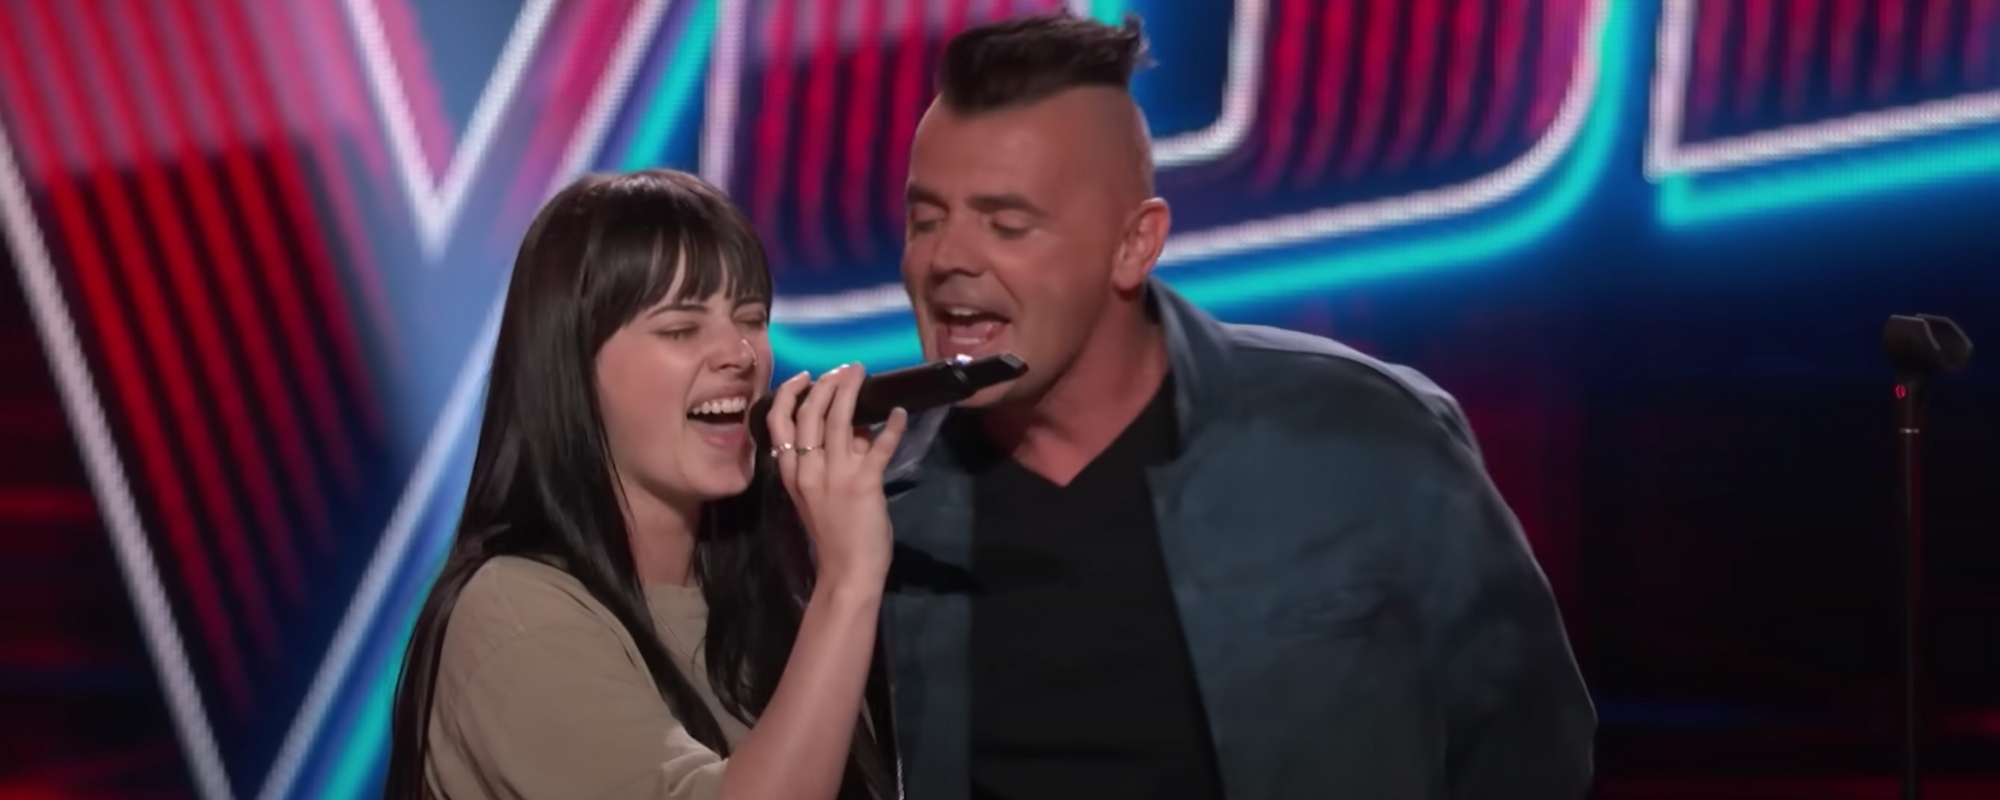 Jadyn Olesen, Daughter of ‘The Voice’ Star Bryan Olesen, Performs “Material Girl” for the First Time